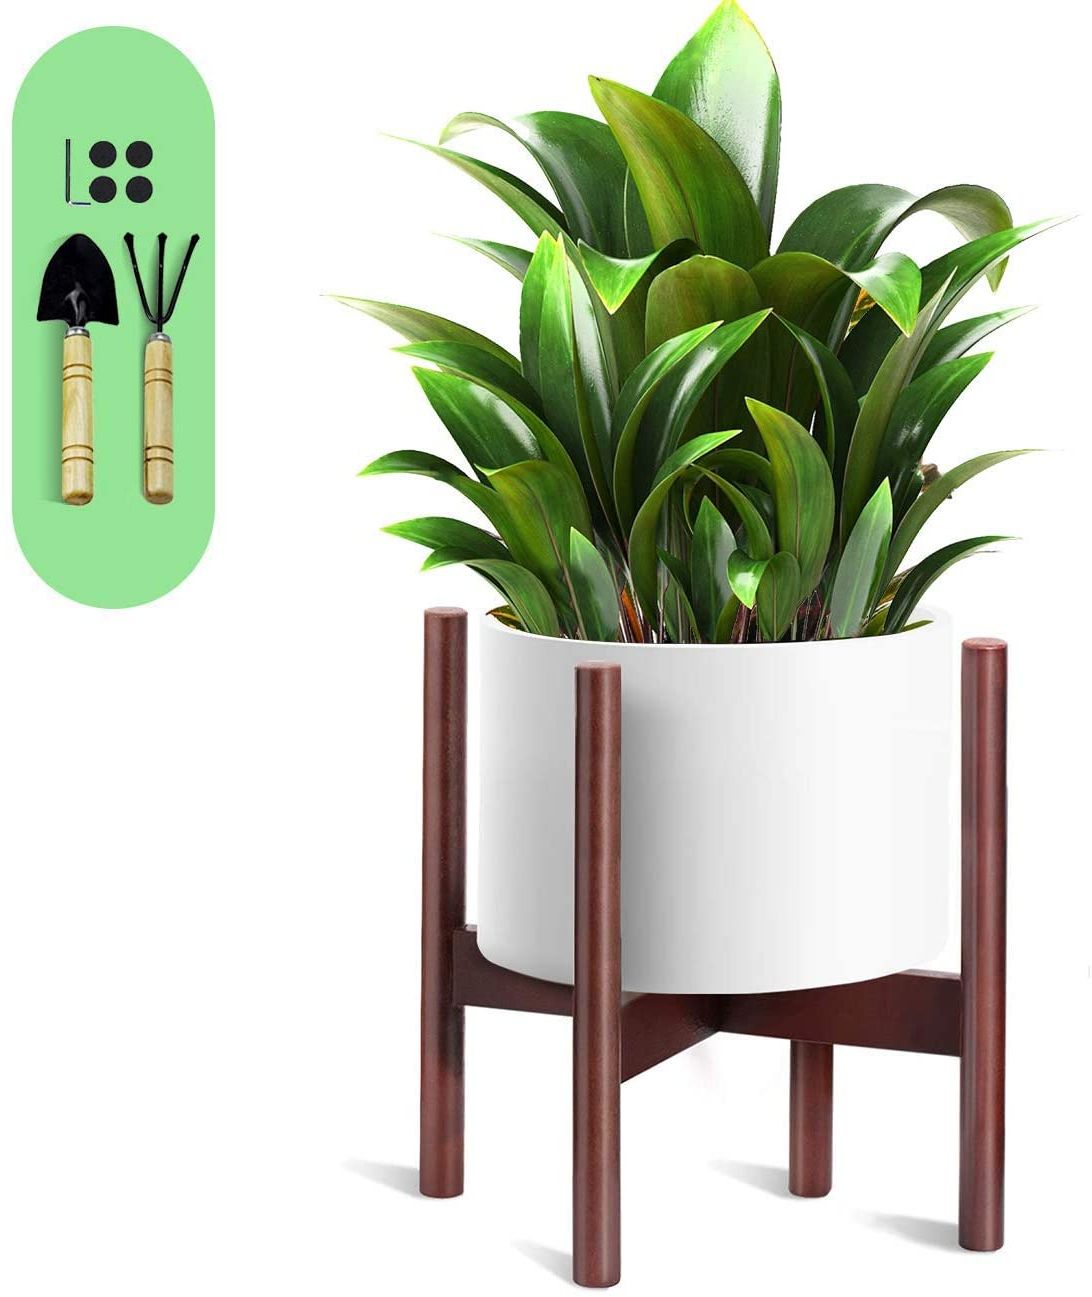 Best And Newest 10 Inch Plant Stands In Plant Stand Wooden 10 Inch With 1 Trowel And 1 Rake Beech Wood Flower Stand  Pot Stand Plan – Buy Flower Pot Wooden Stand,wooden Flower Stand,flower  Stand Wood Product On Alibaba (View 10 of 10)